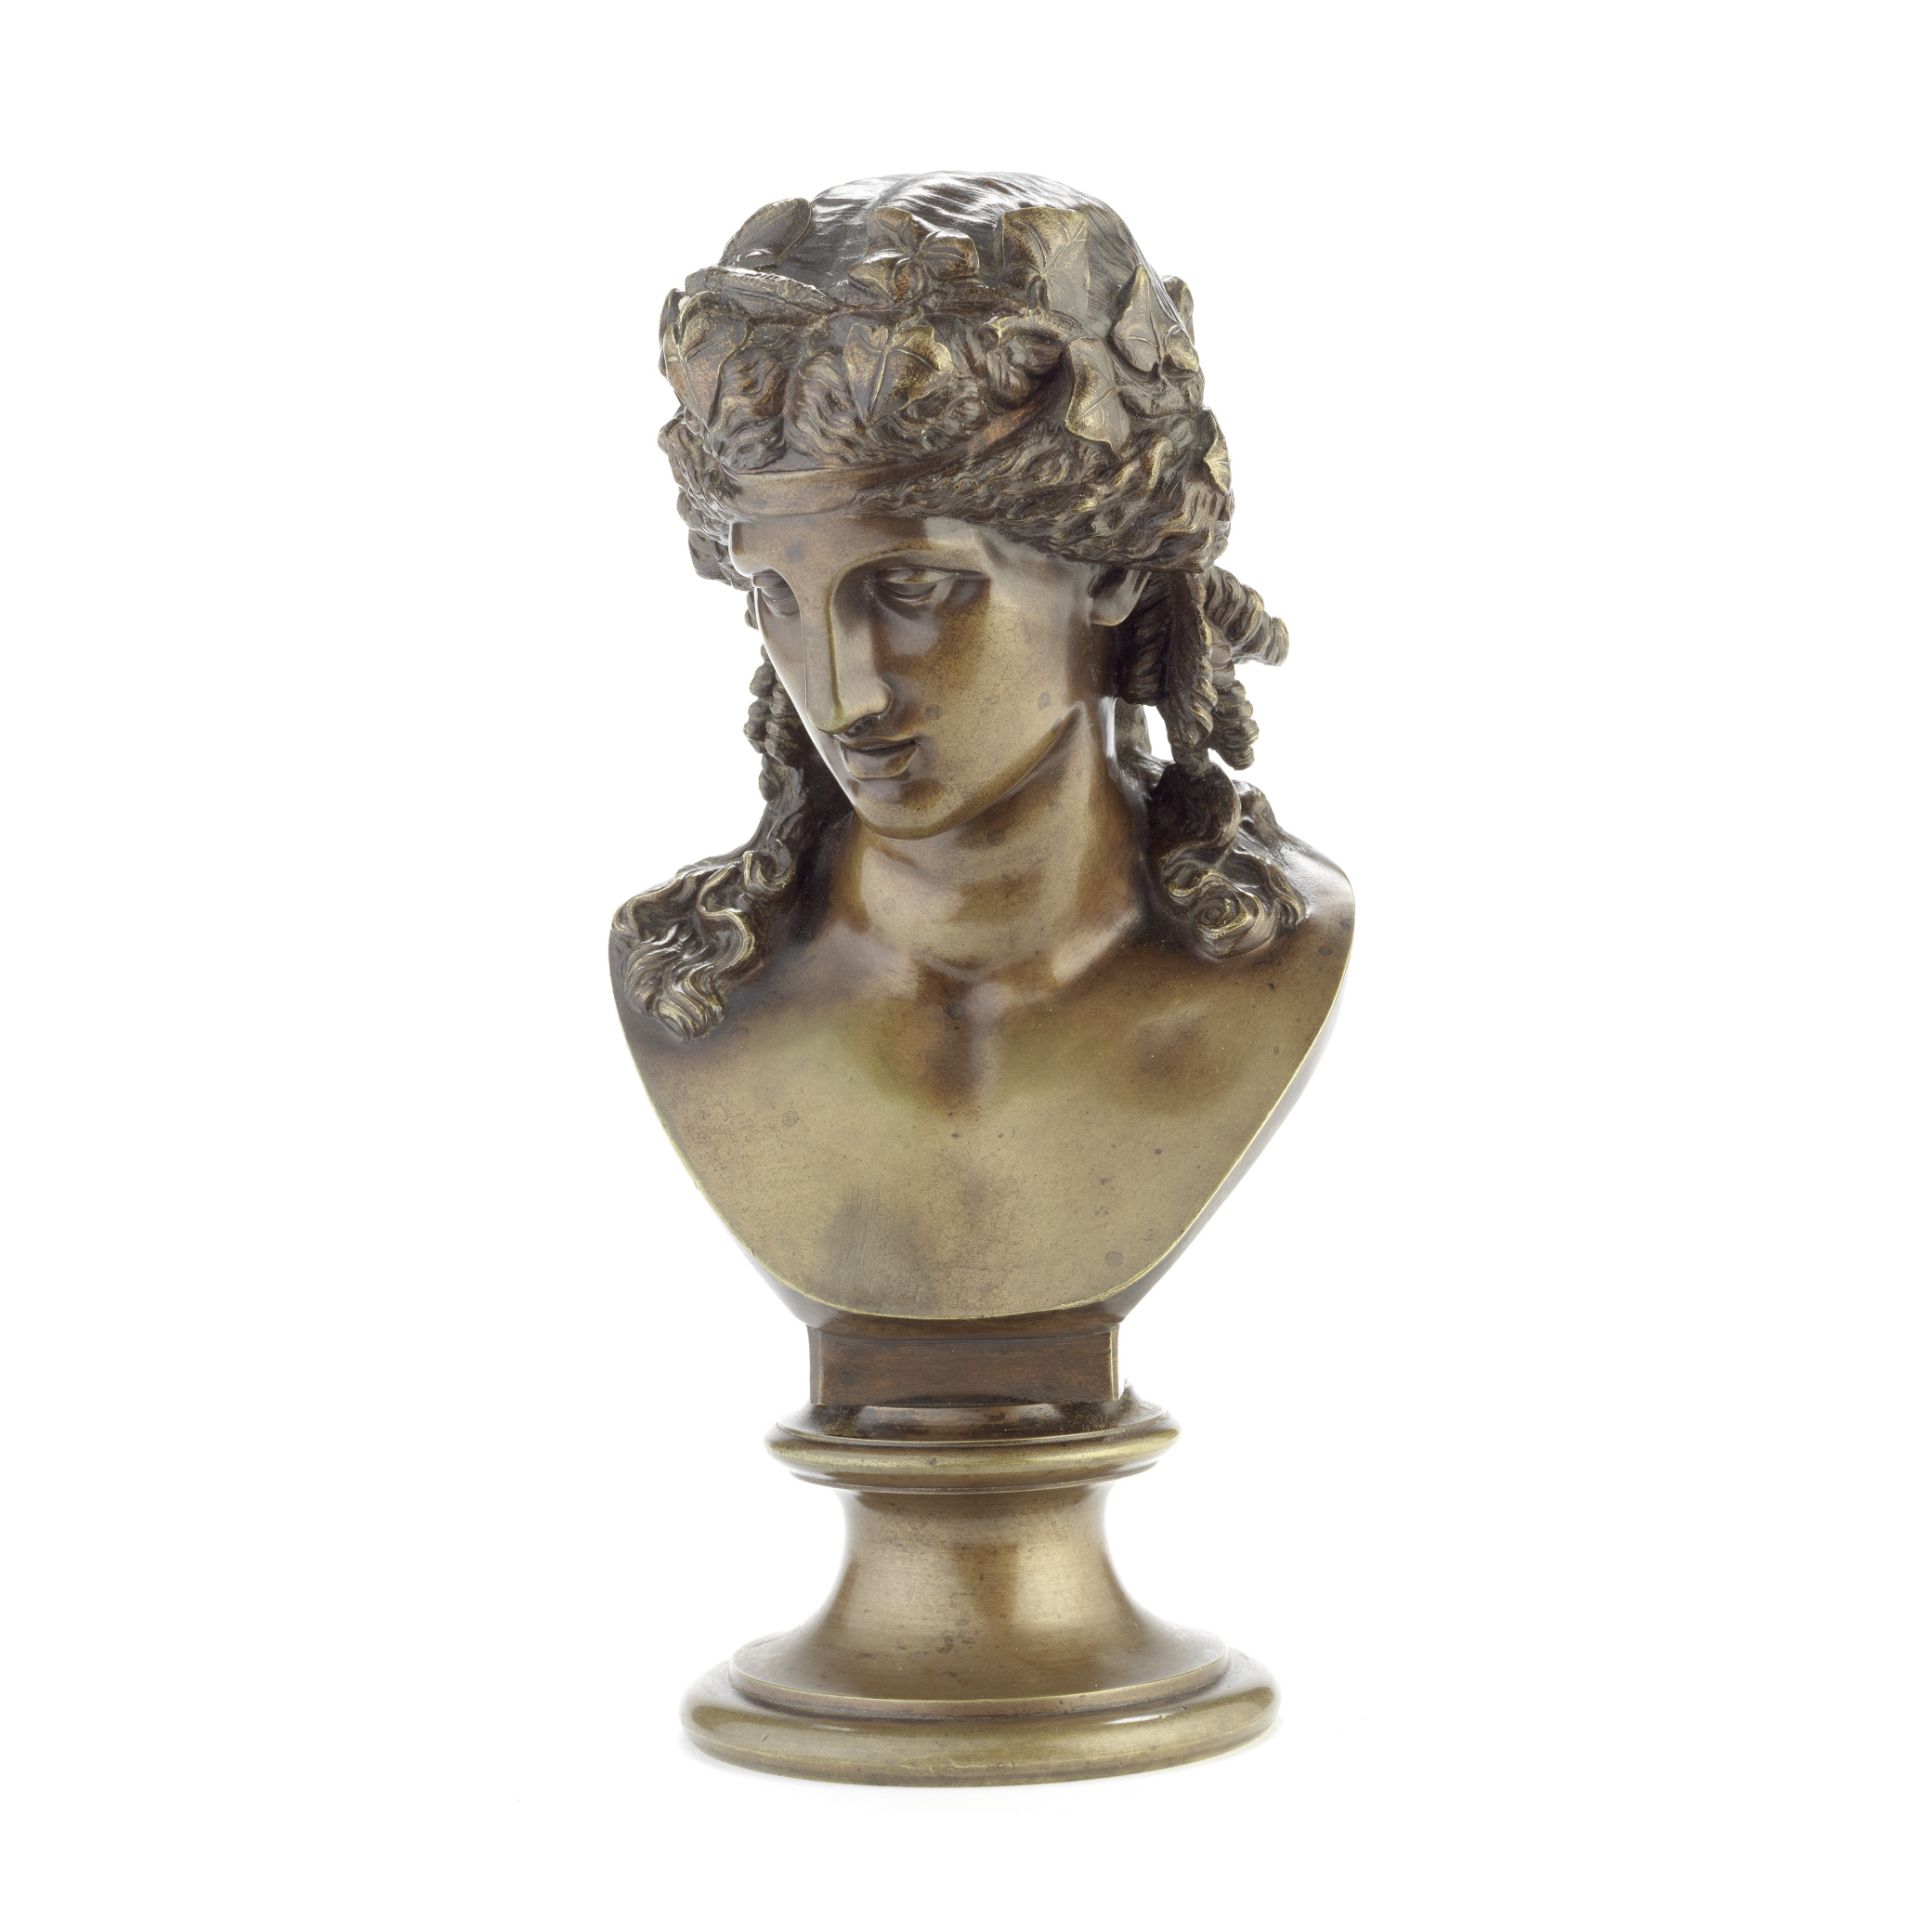 A mid 19th century patinated bronze bust of Dionysus after the antique, French or Italian